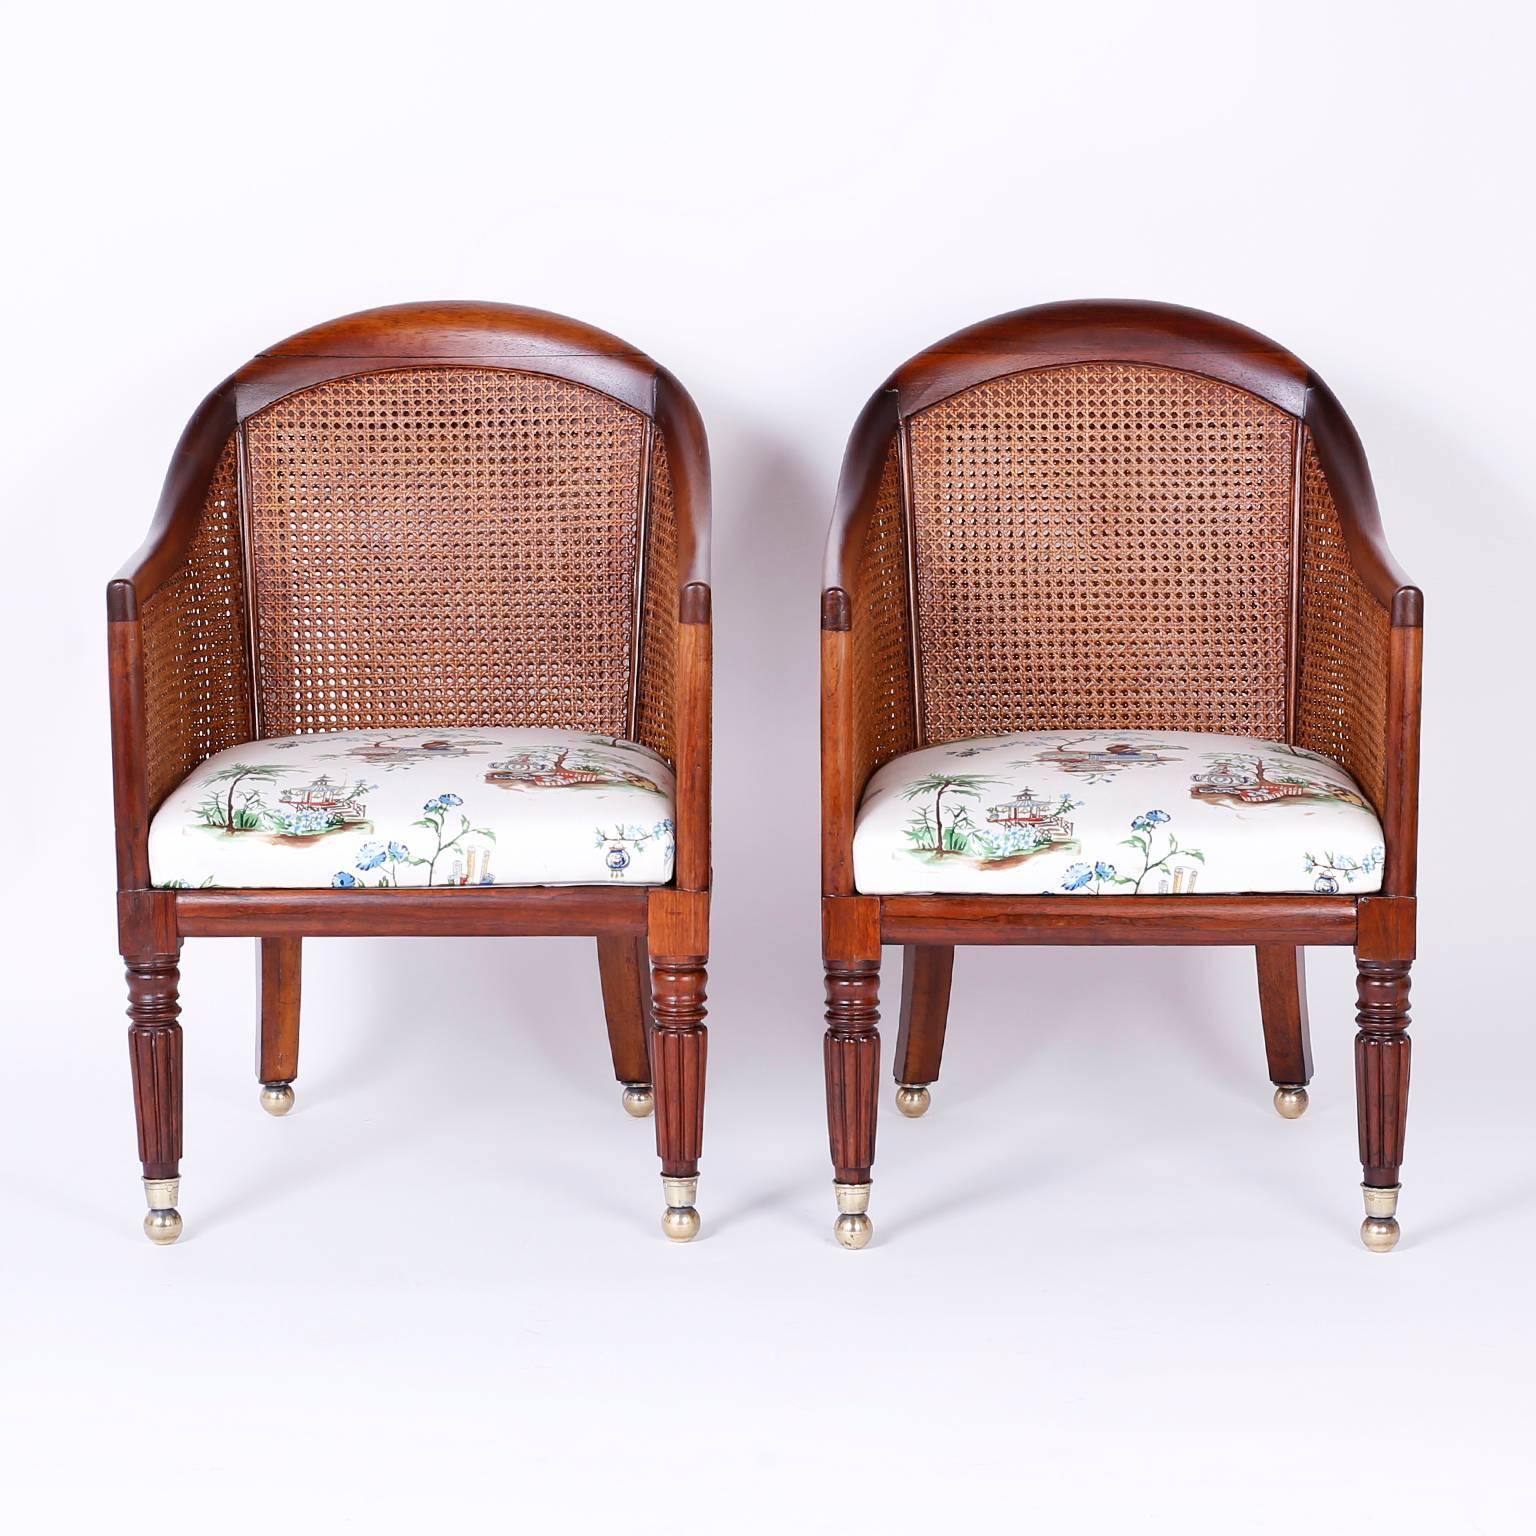 A fine pair of antique late Regency style English rosewood tub chairs that borrow influences from Directoire and Empire. The back and sides are double caned to breathe with maximum durability. The bold front legs are lathe turned and reeded, the